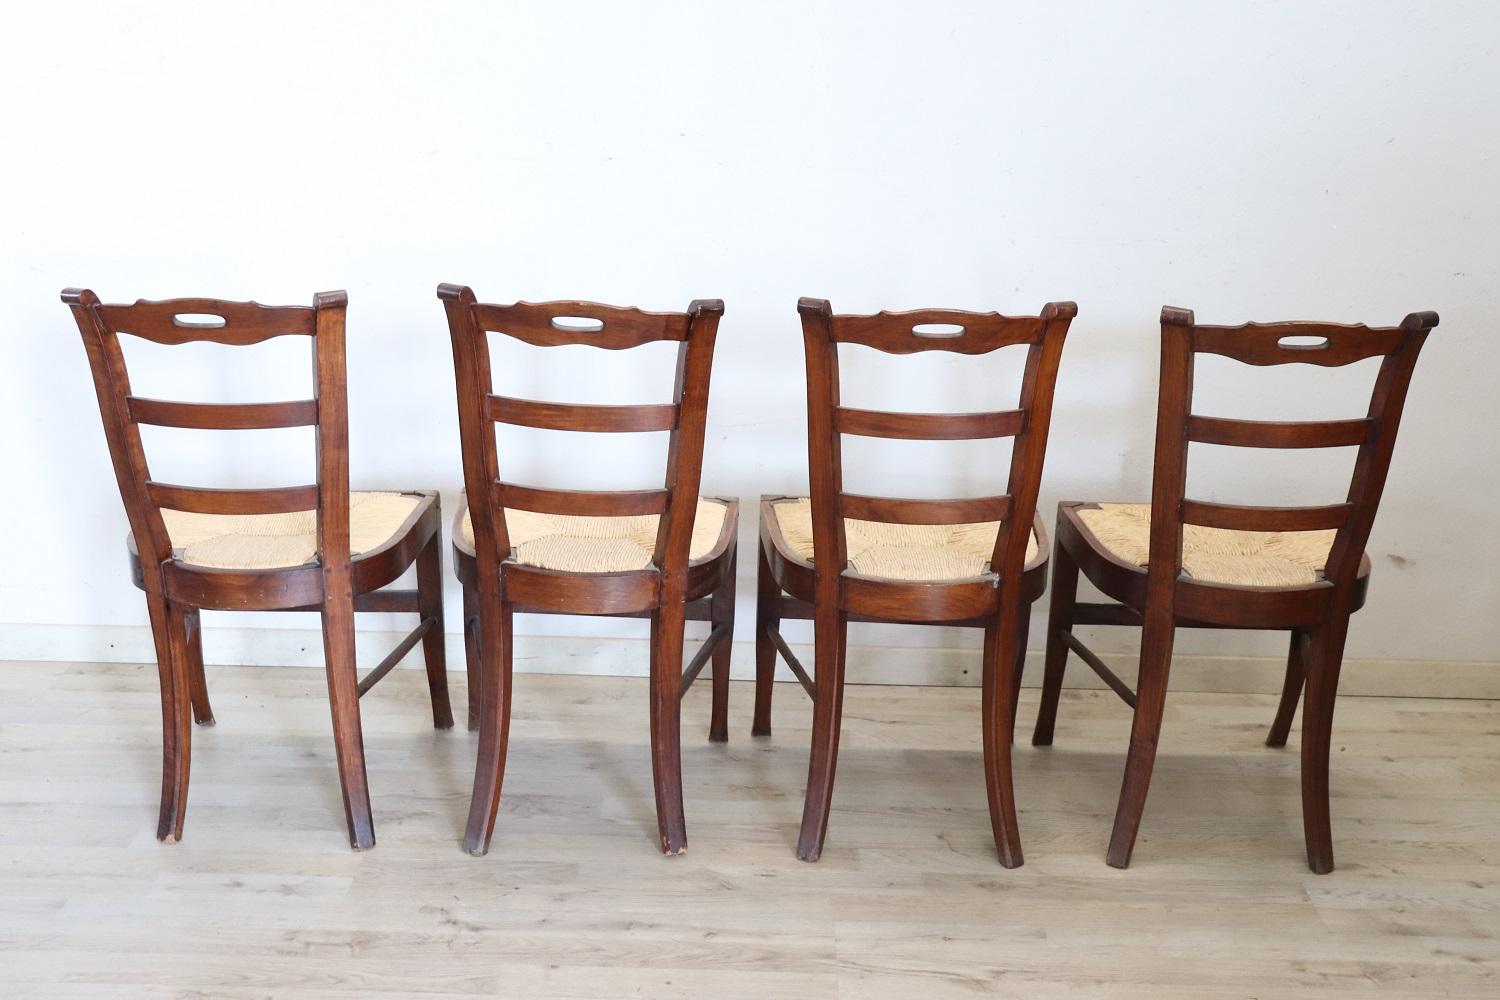 Late 19th Century 19th Century Set of Four Antique Chairs in Cherry Wood with Straw Seat For Sale